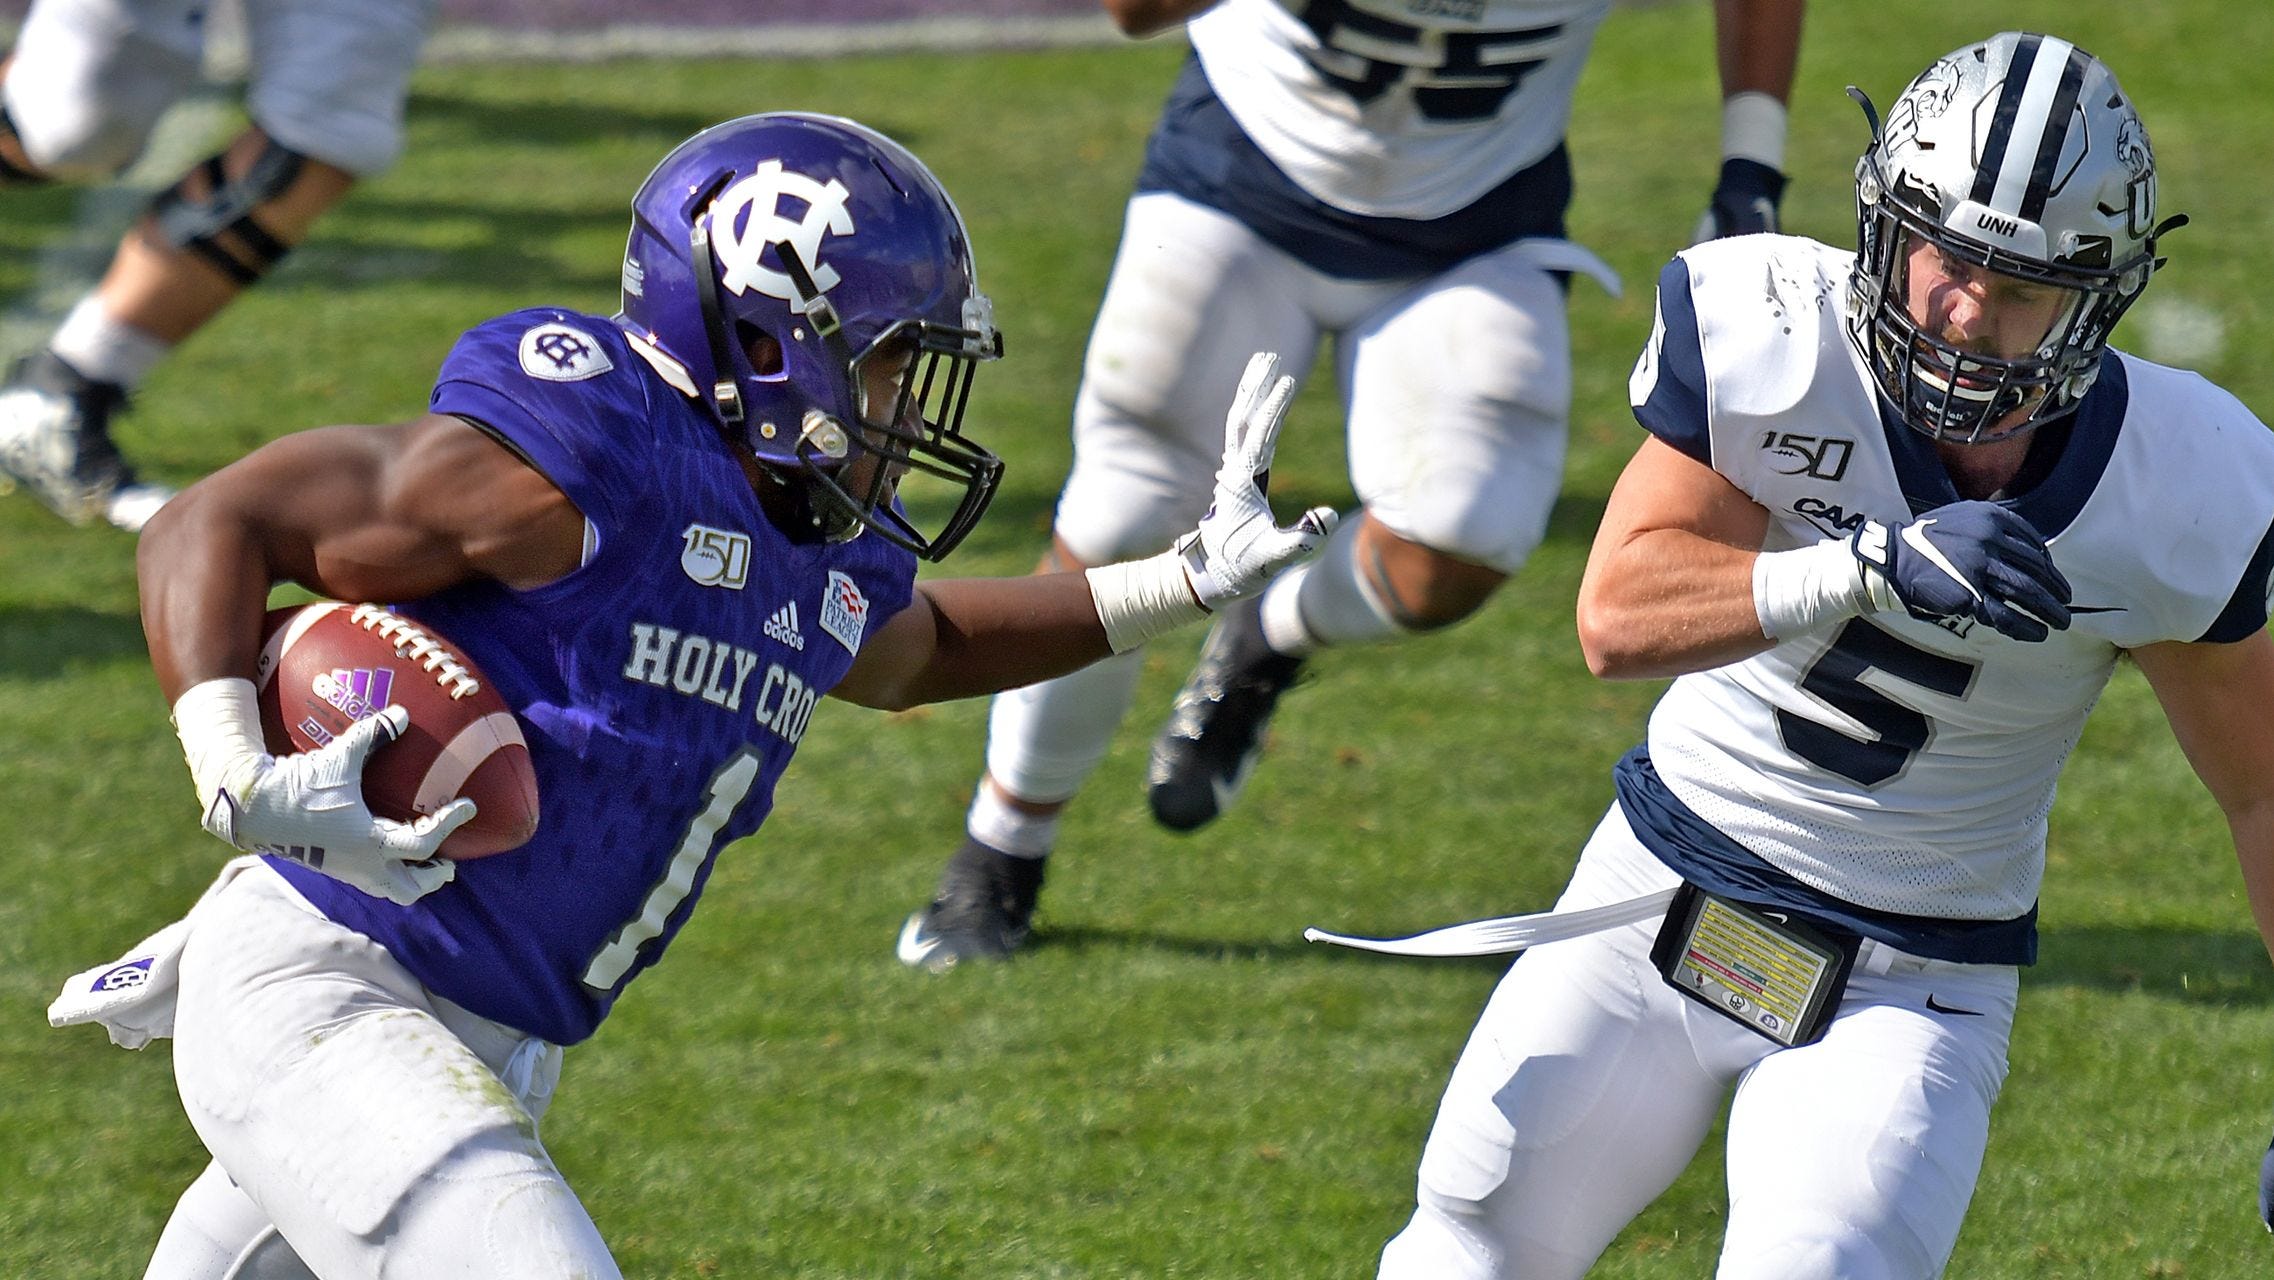 Holy Cross football set to 'spring' into action March 13